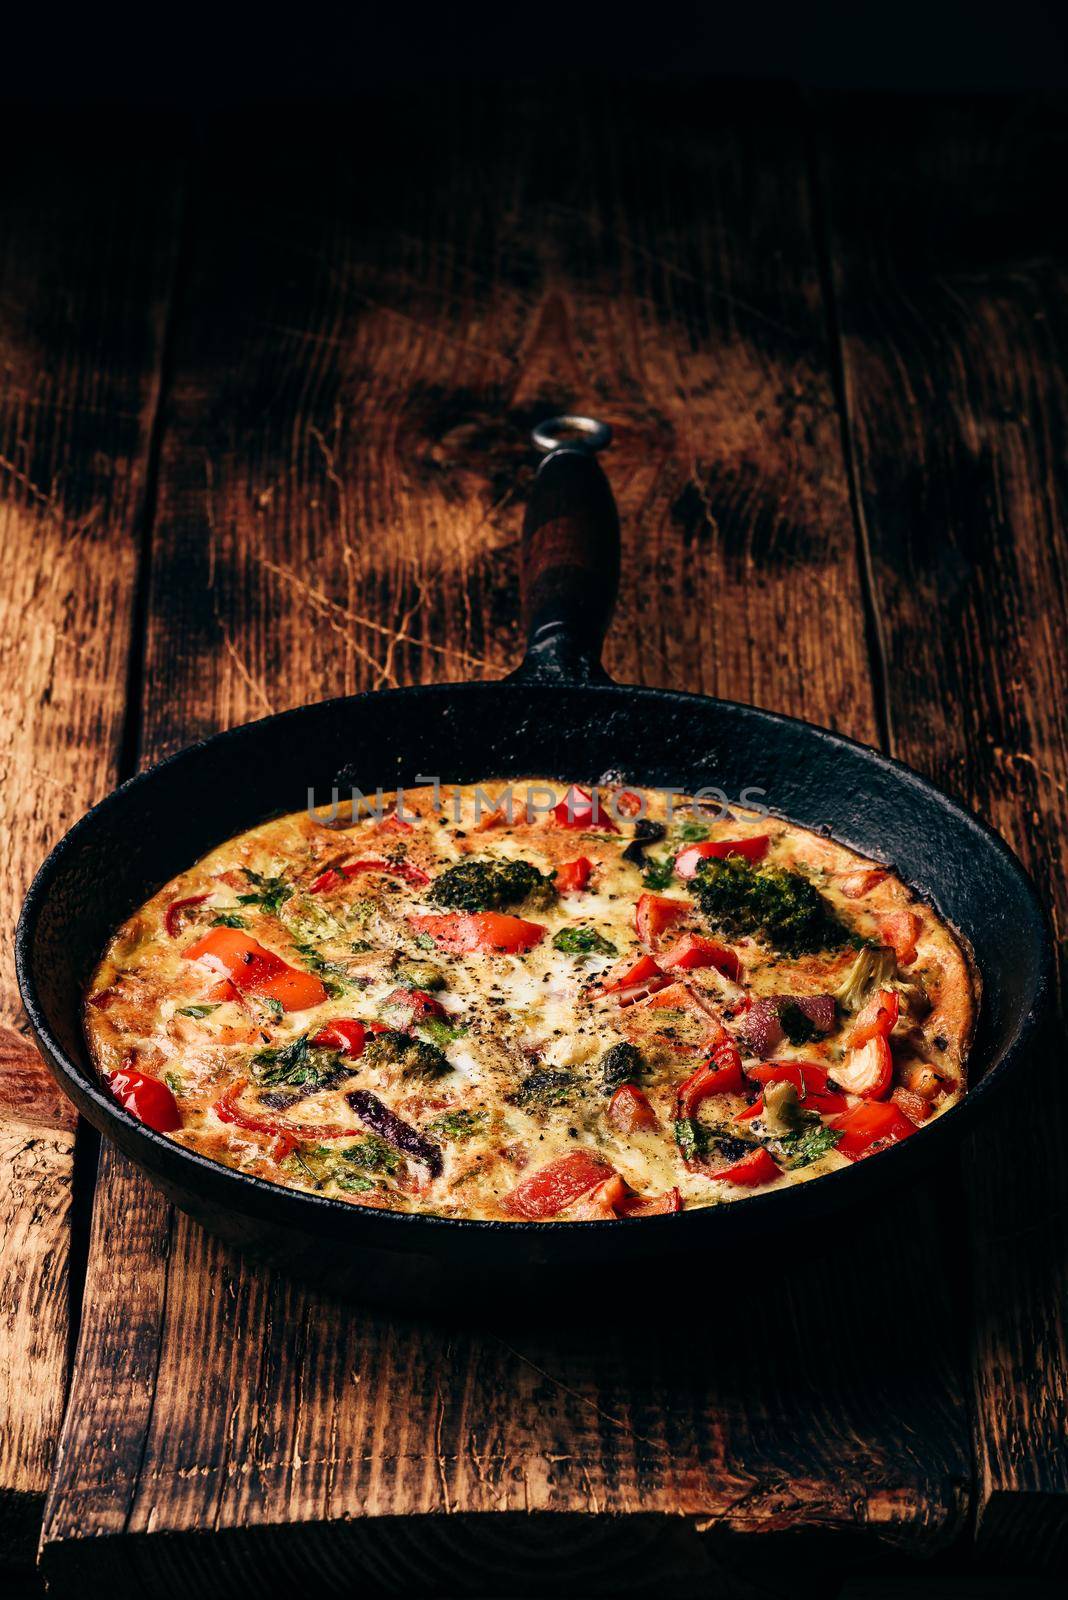 Vegetable frittata with broccoli and red pepper by Seva_blsv